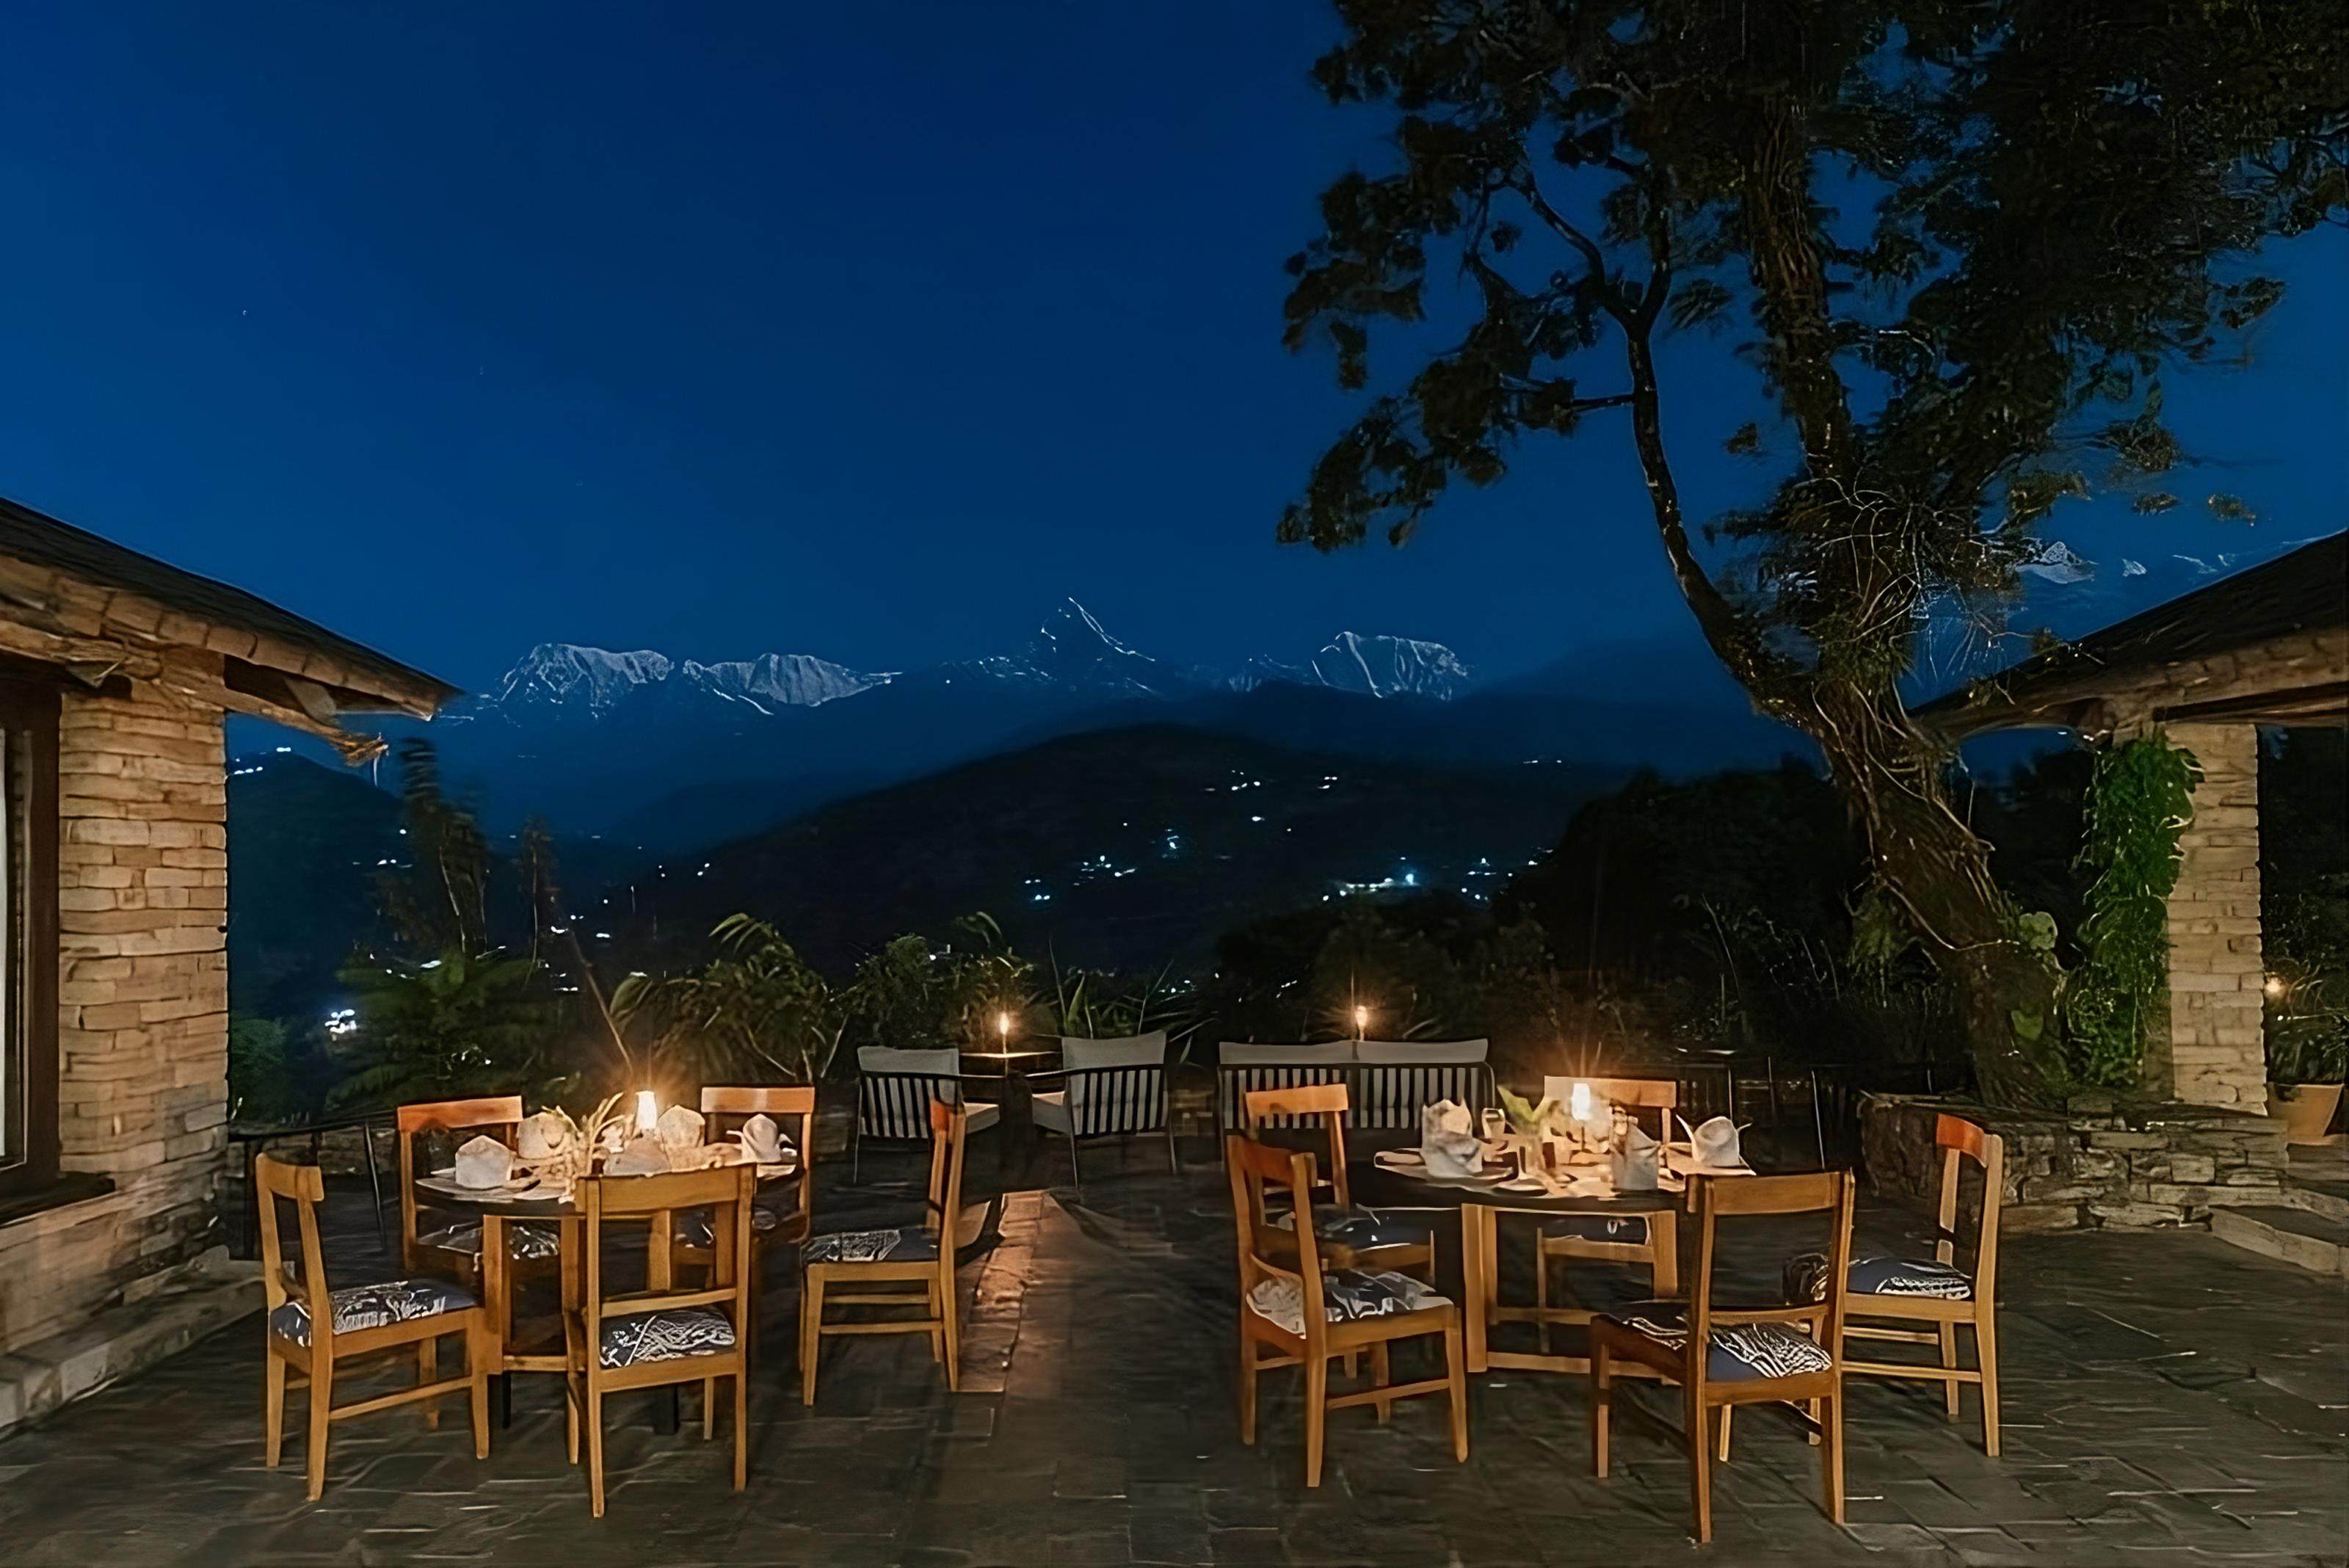 Tiger Mountain Pokhara Lodge, overlooking the magnificent fishtail-like Mount Machhapuchchhrethe, opened along a route that Britain’s King Charles trekked in the 1980s. Photo: Handout